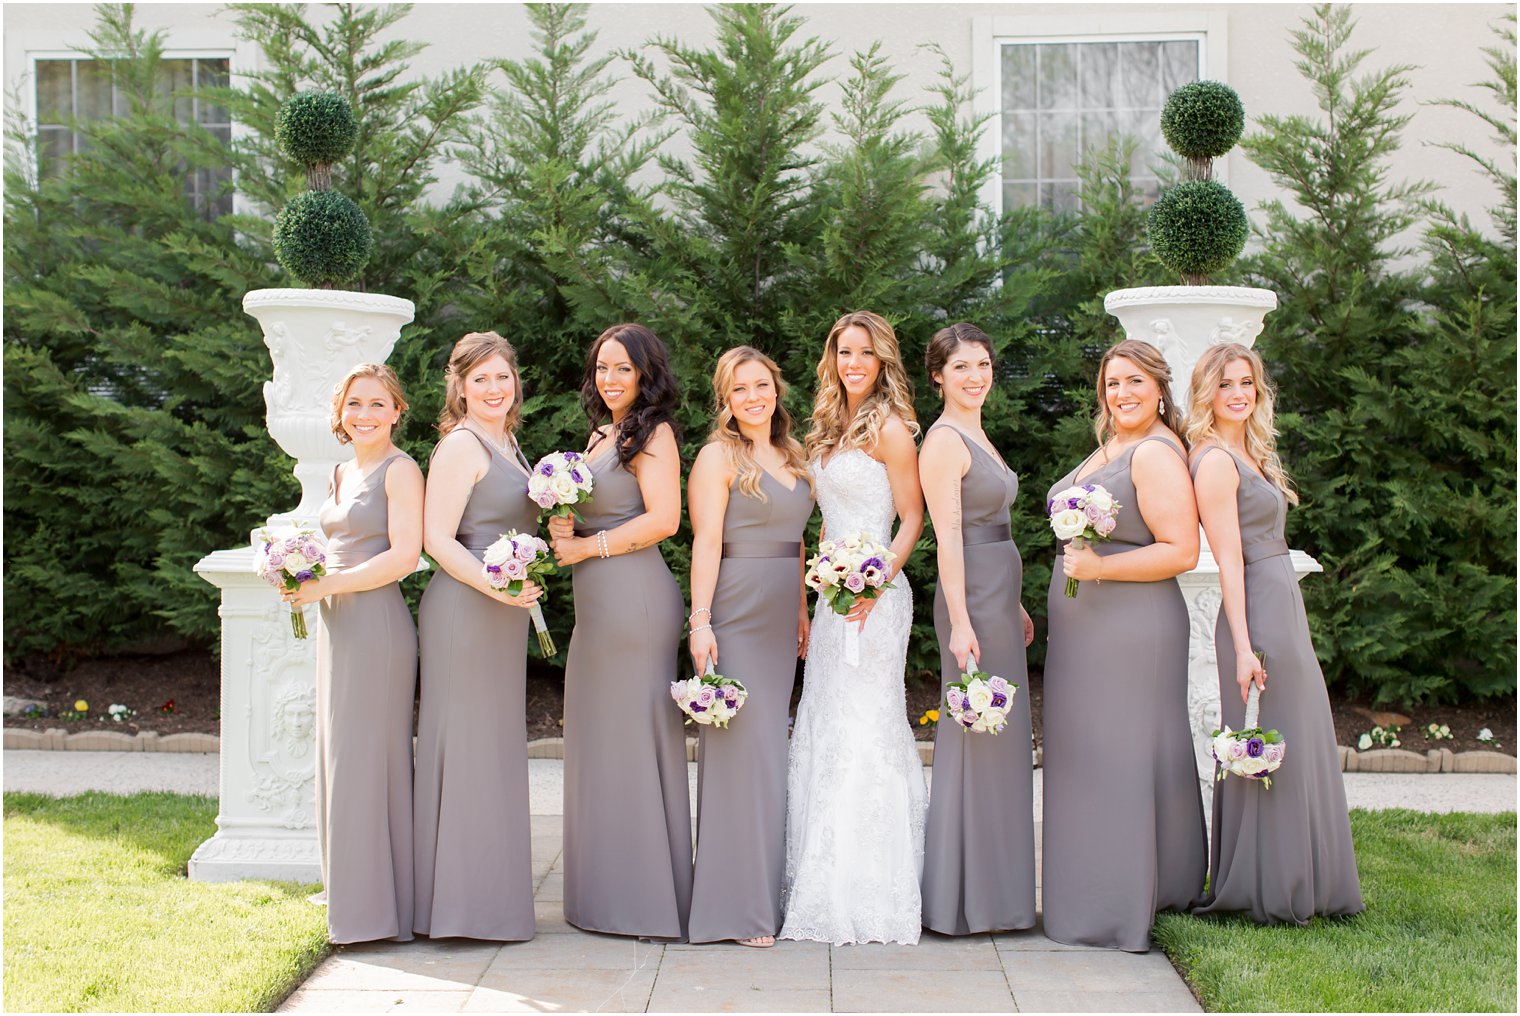 Spring wedding in purple and gray | Photos by Idalia Photography